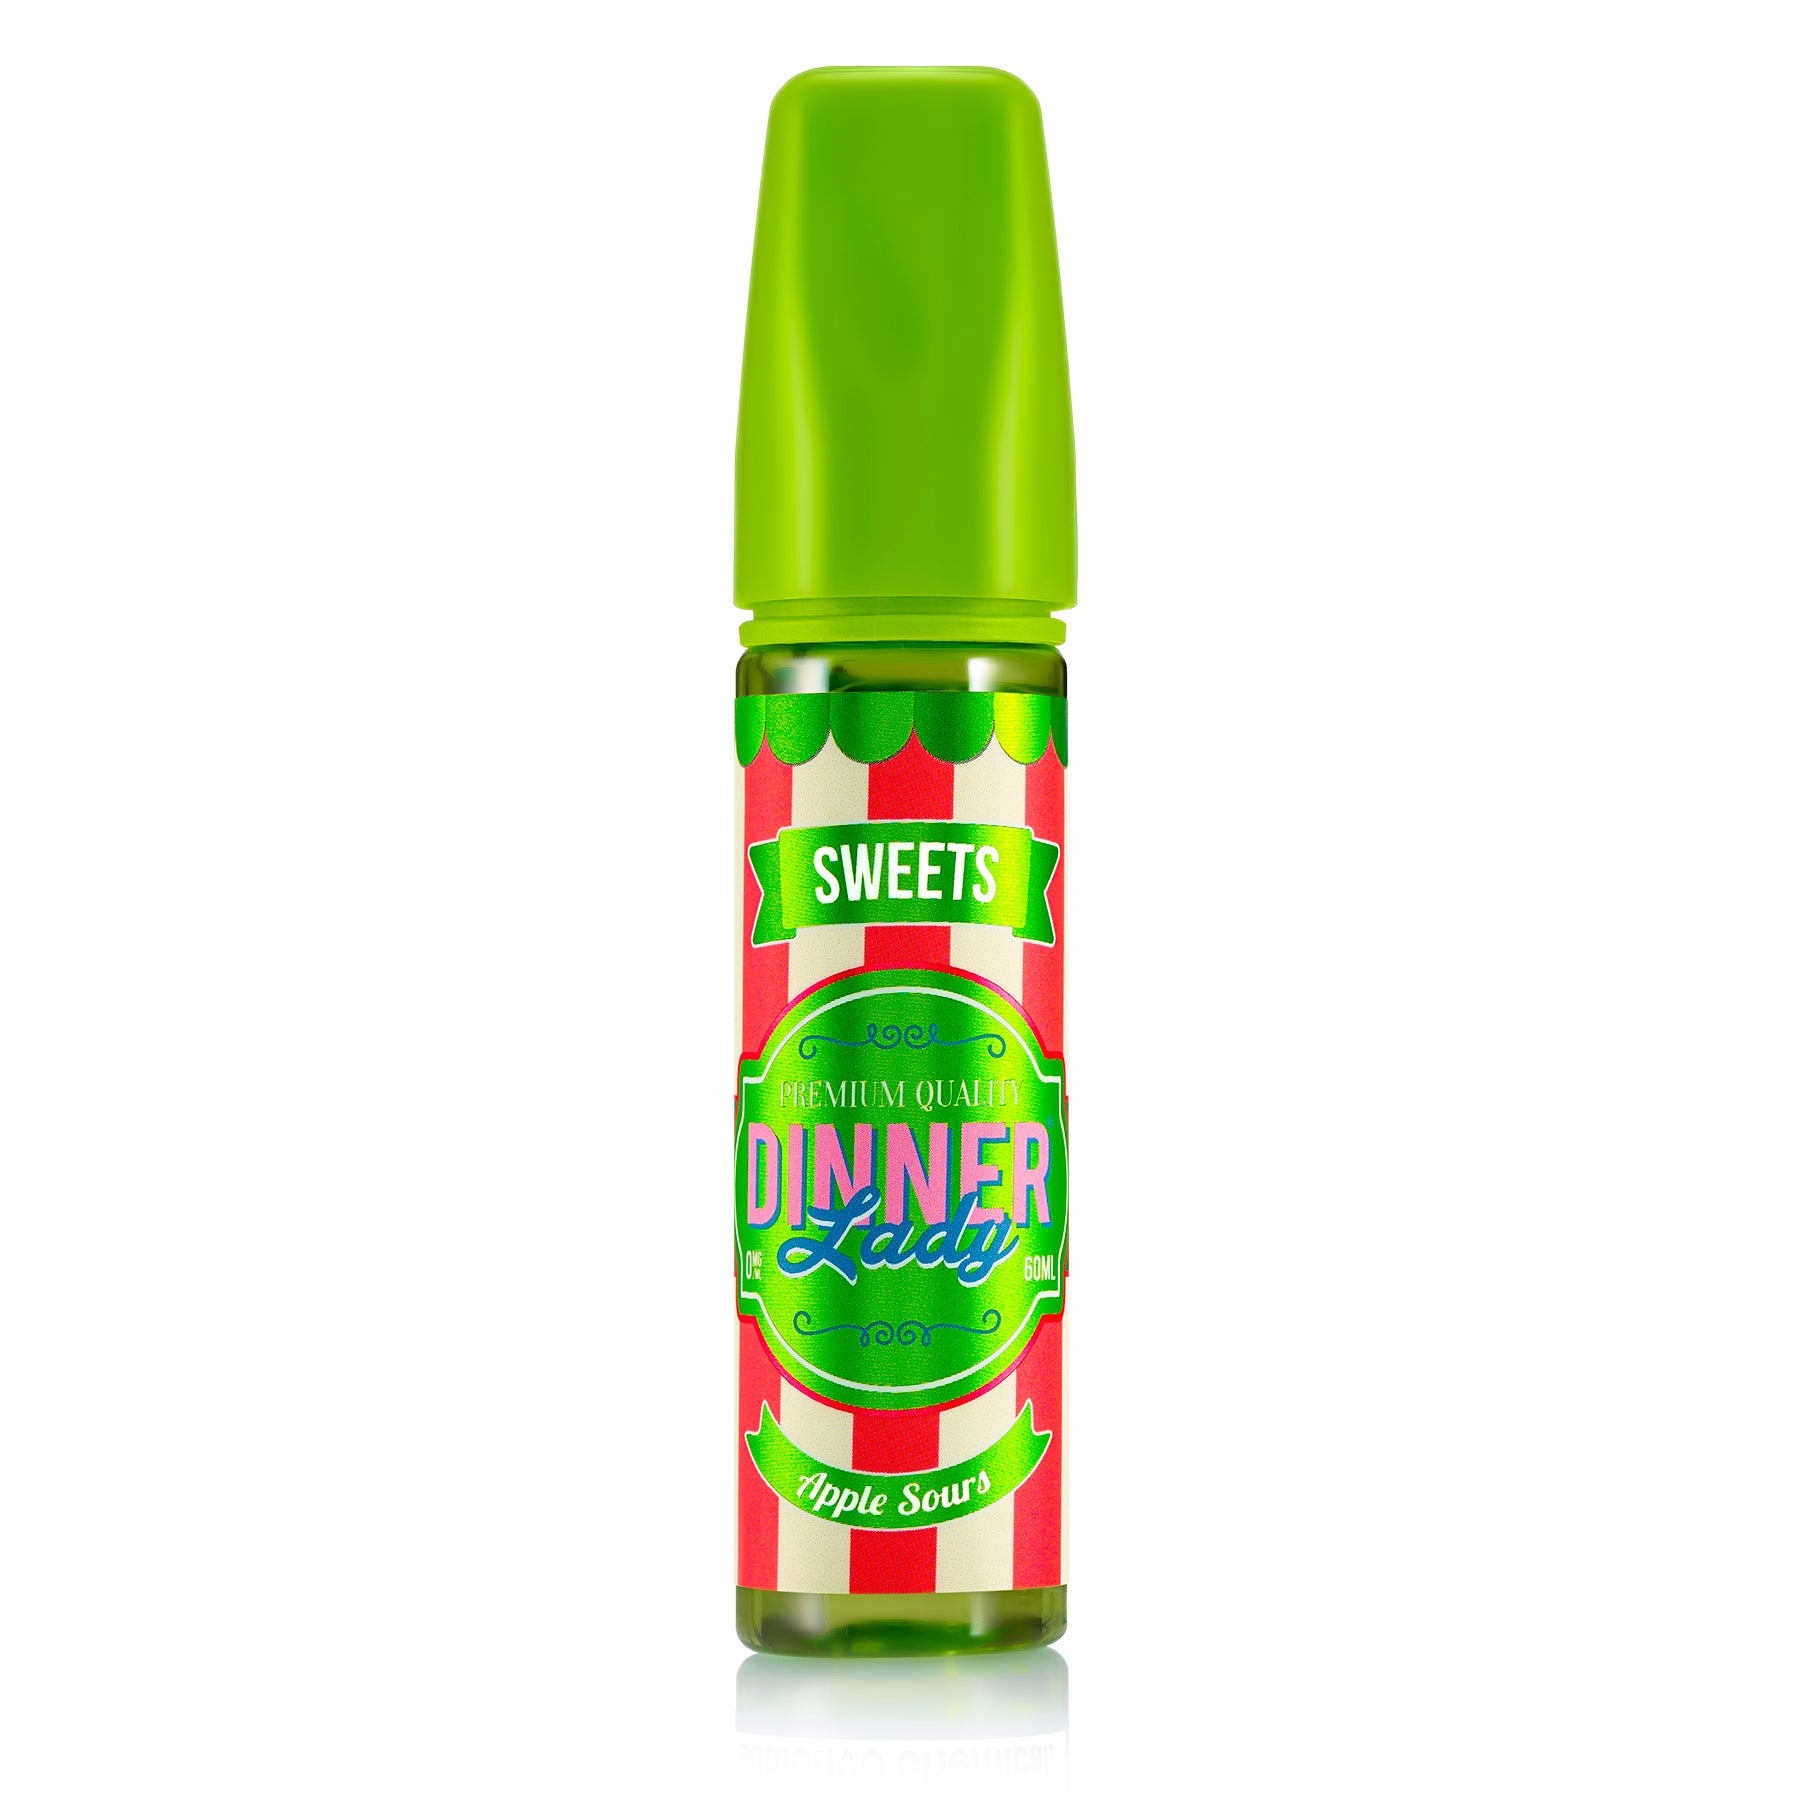 Dinner Lady | 60ml | Sweets | Apple Sours | Wholesale